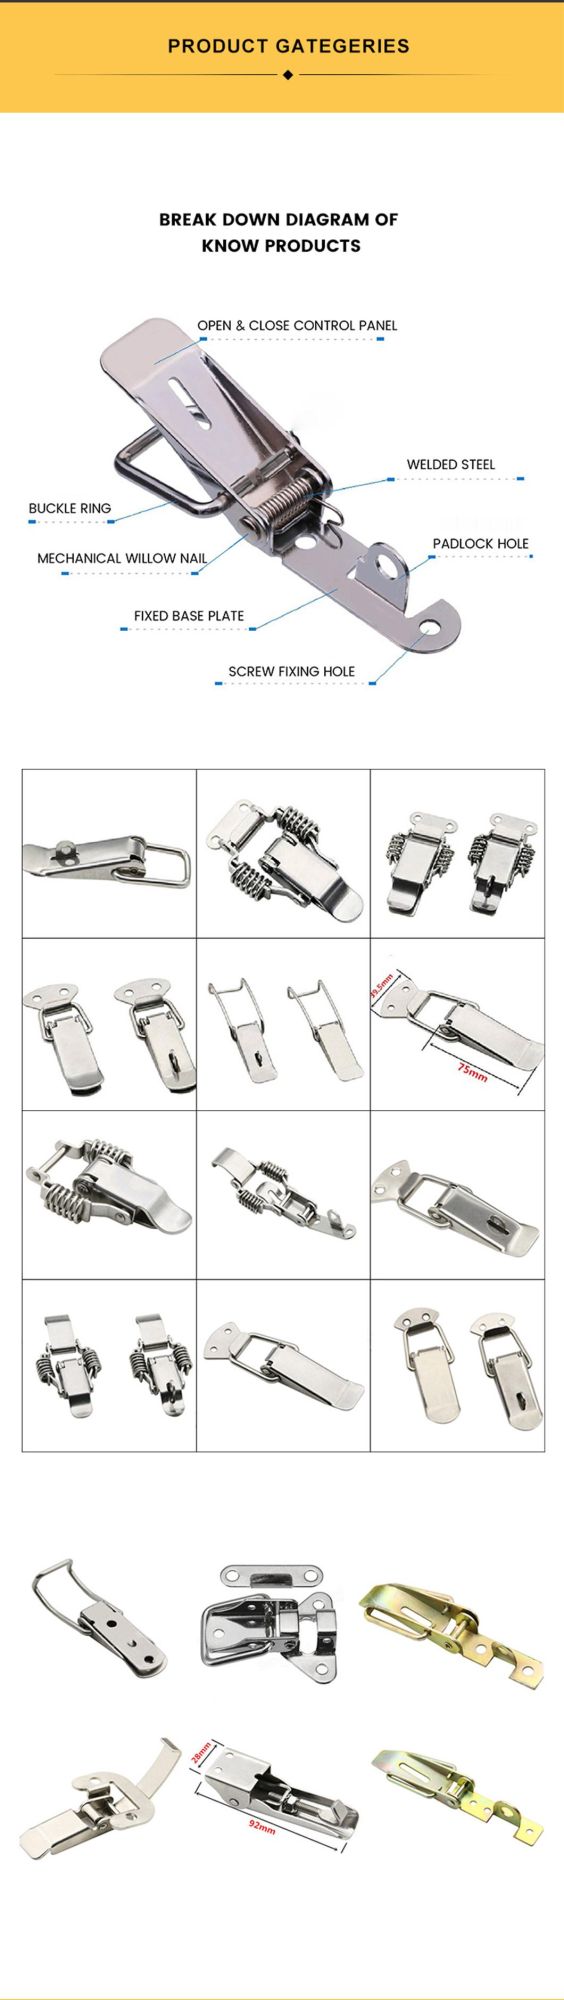 Spring Pin Latch U-Shackle Buckle Toggle Latch Clamp A40123 Stainless Steel Compression Latch